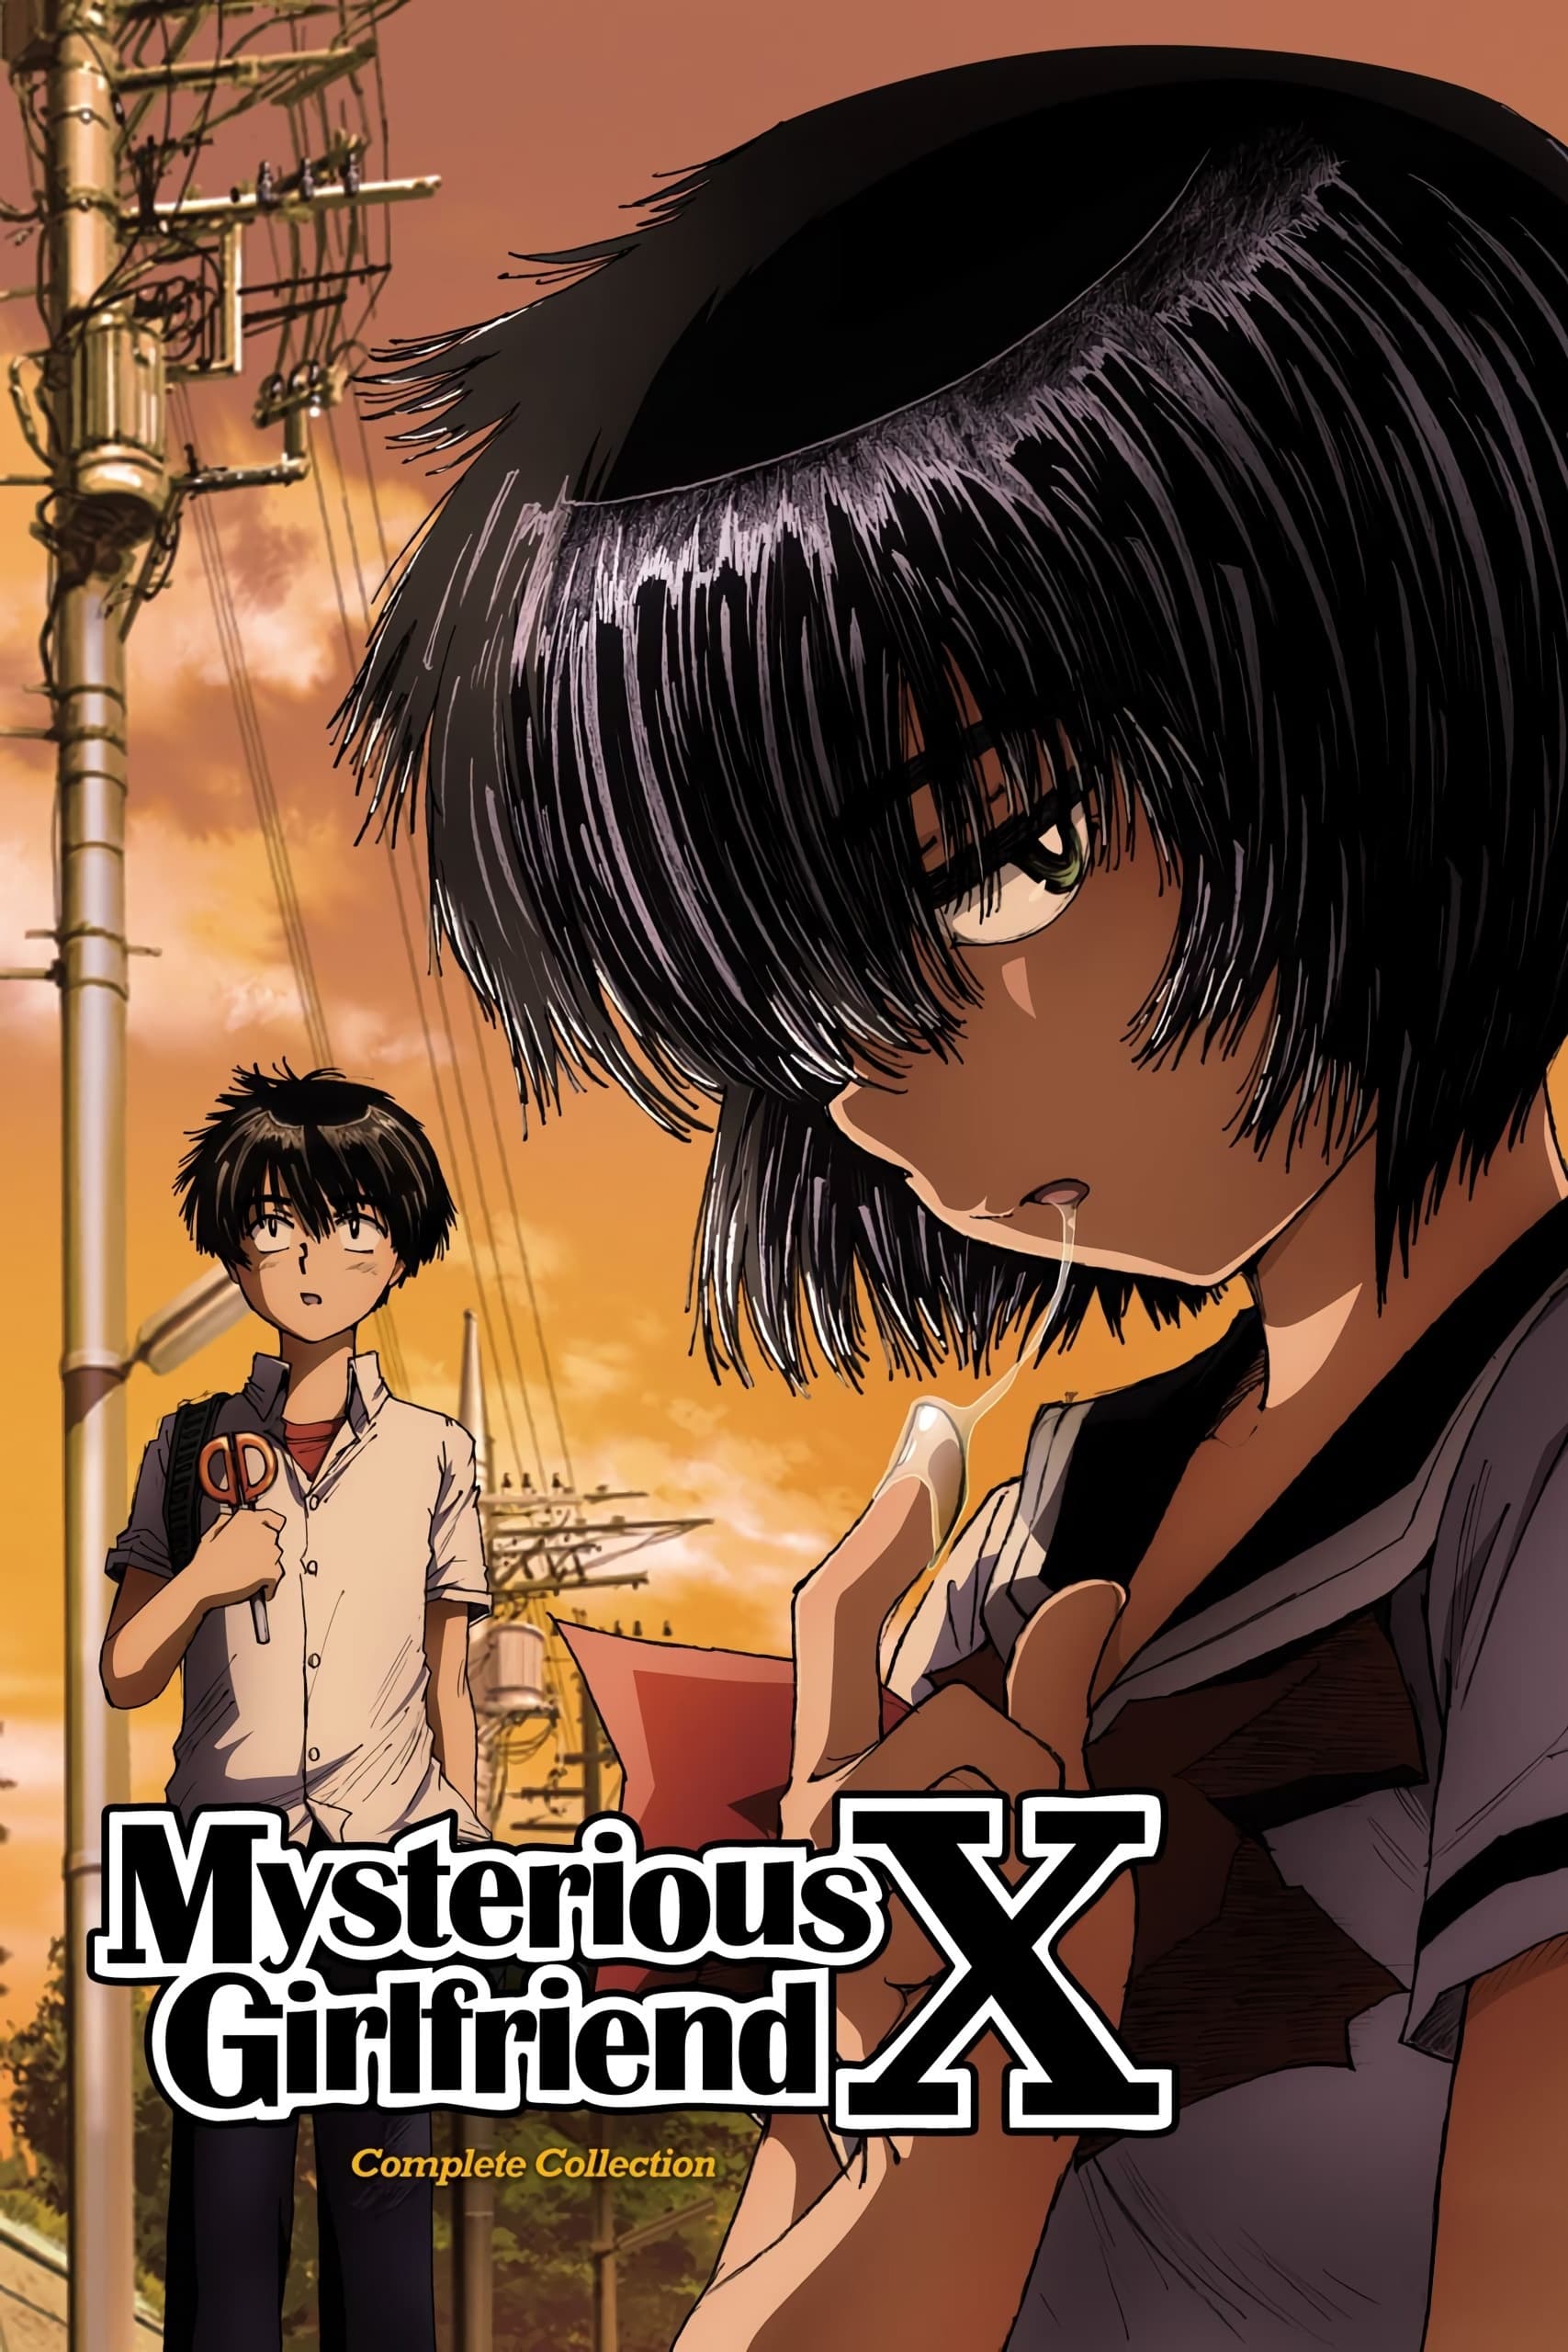 Mysterious Girlfriend X Picture - Image Abyss.